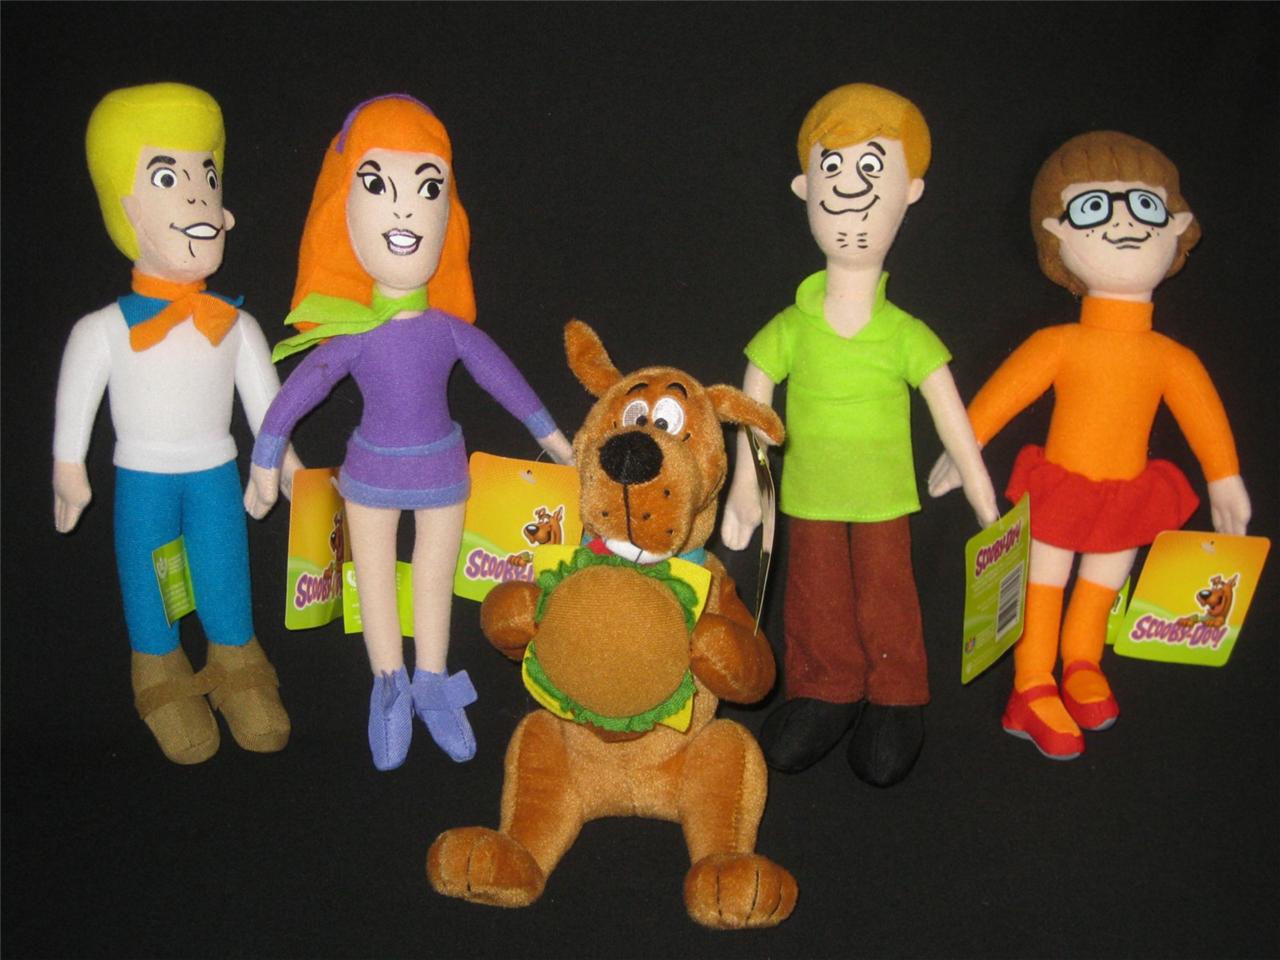 SCOOBY DOO, SHAGGY, DAPHNE, FRED VELMA PLUSH TOY SET - BRAND NEW WITH ...